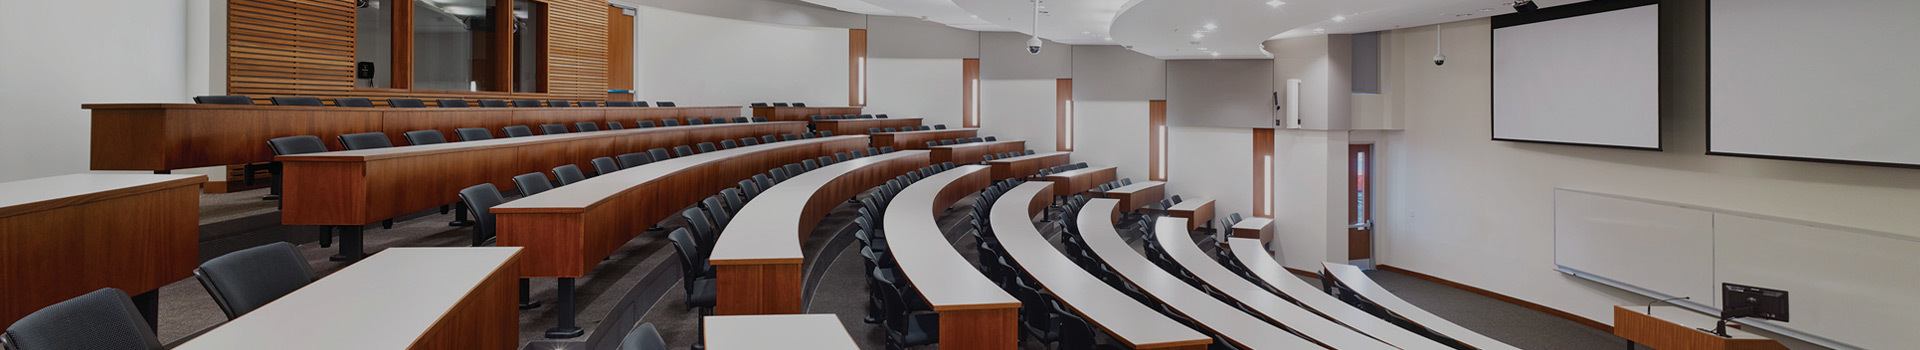 Conference Room Lecture Hall